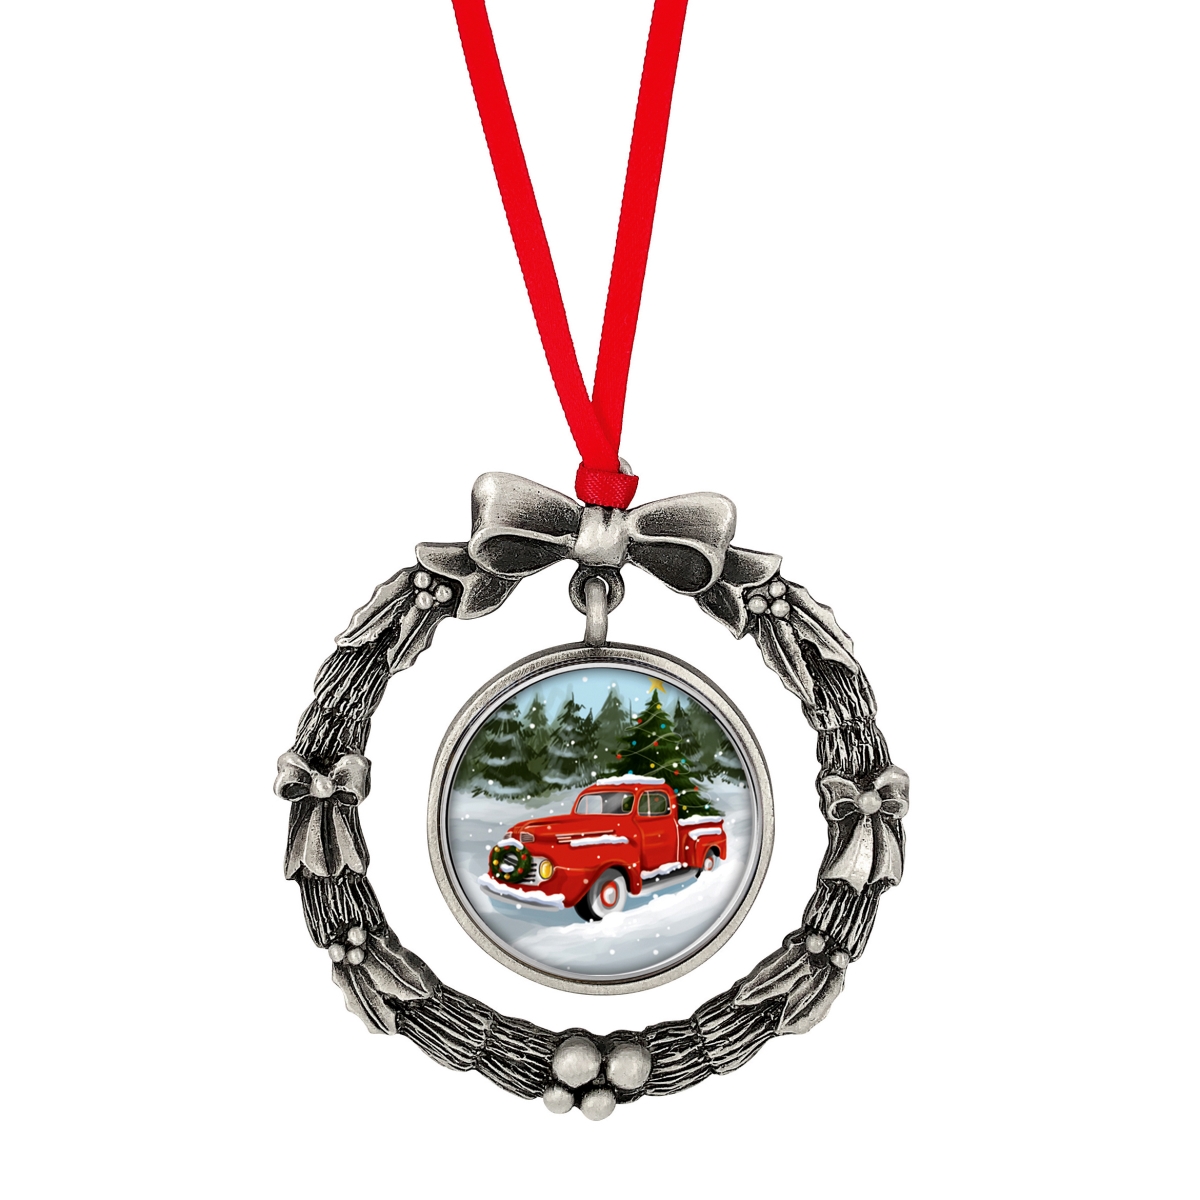 Picture of American Coin Treasures 16608 JFK Half Dollar Wreath Ornament with Colorized Vintage Christmas Tree Truck Coin, Red